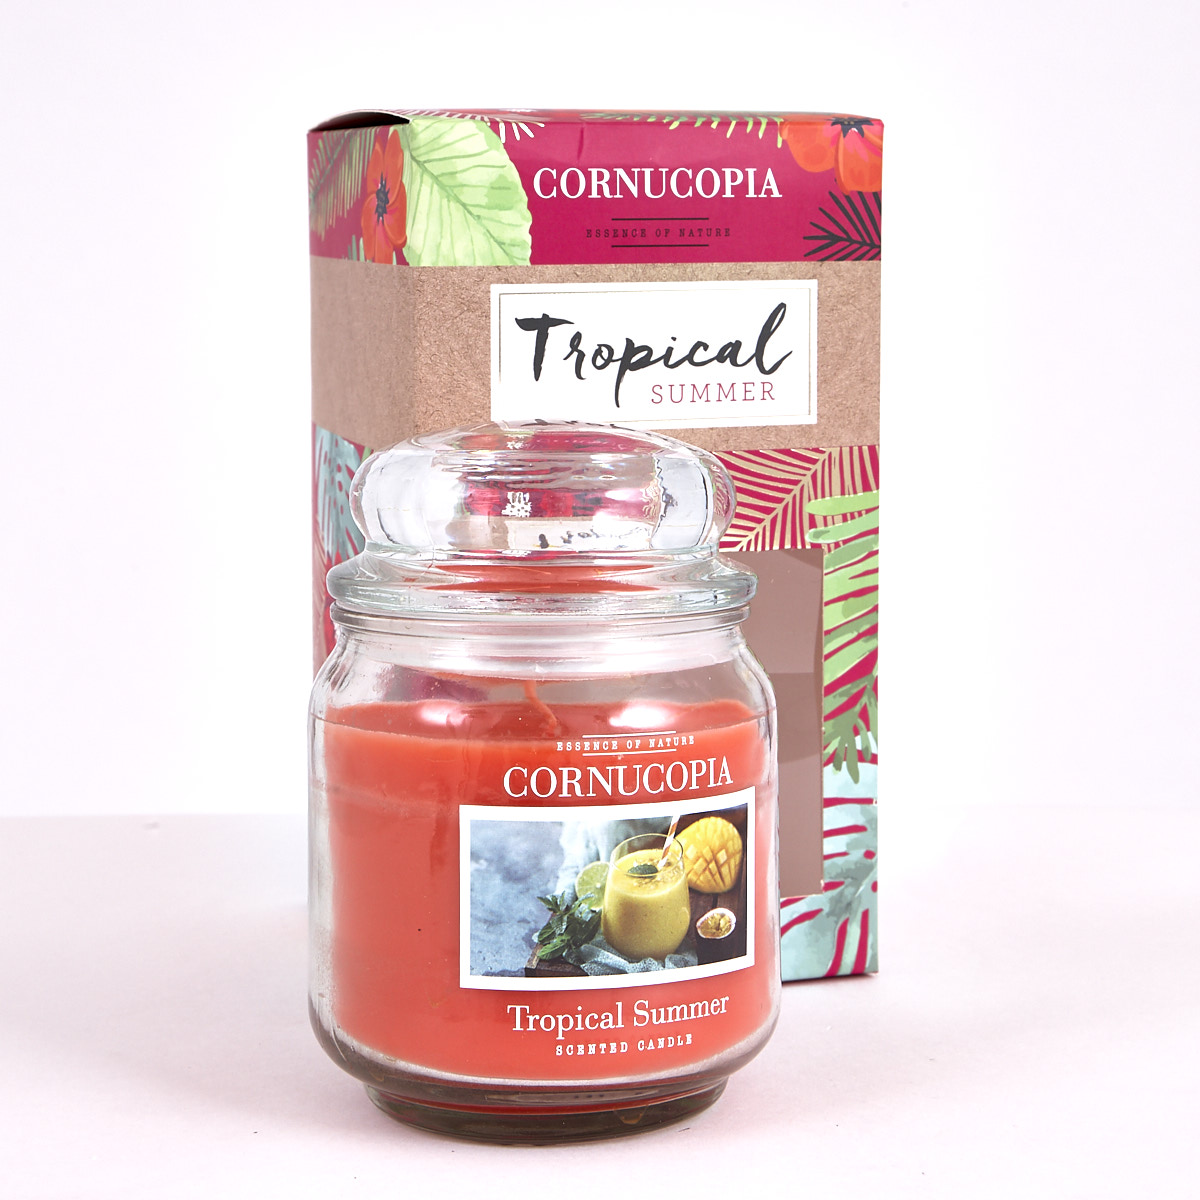 Cornucopia Boxed Tropical Summer Scented Candle